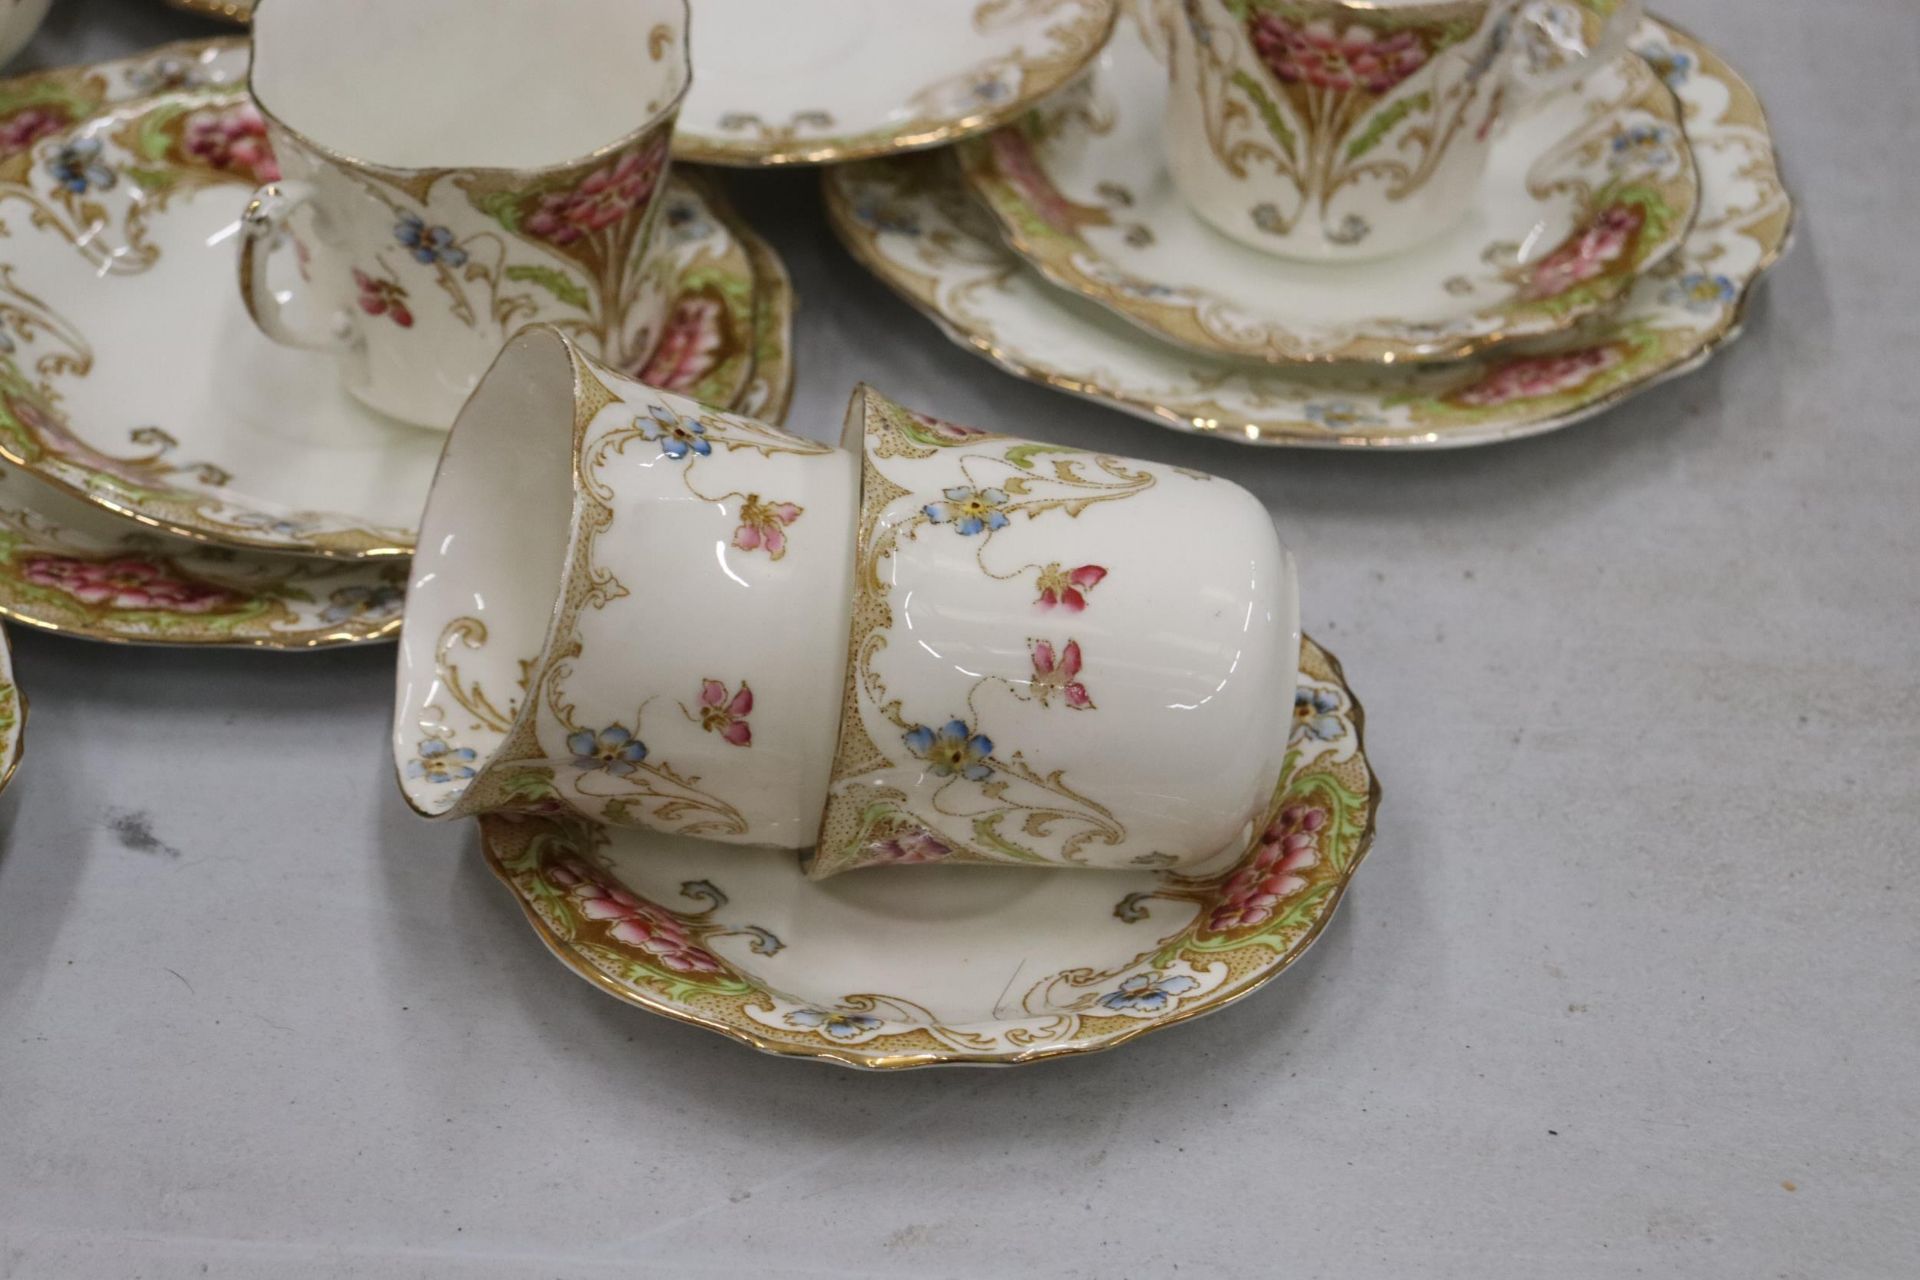 A LATE 18TH/EARLY 19TH CENTURY TEASET BY FRED B PEARCE & CO, LONDON, TO INCLUDE CAKE PLATES, A CREAM - Image 9 of 10